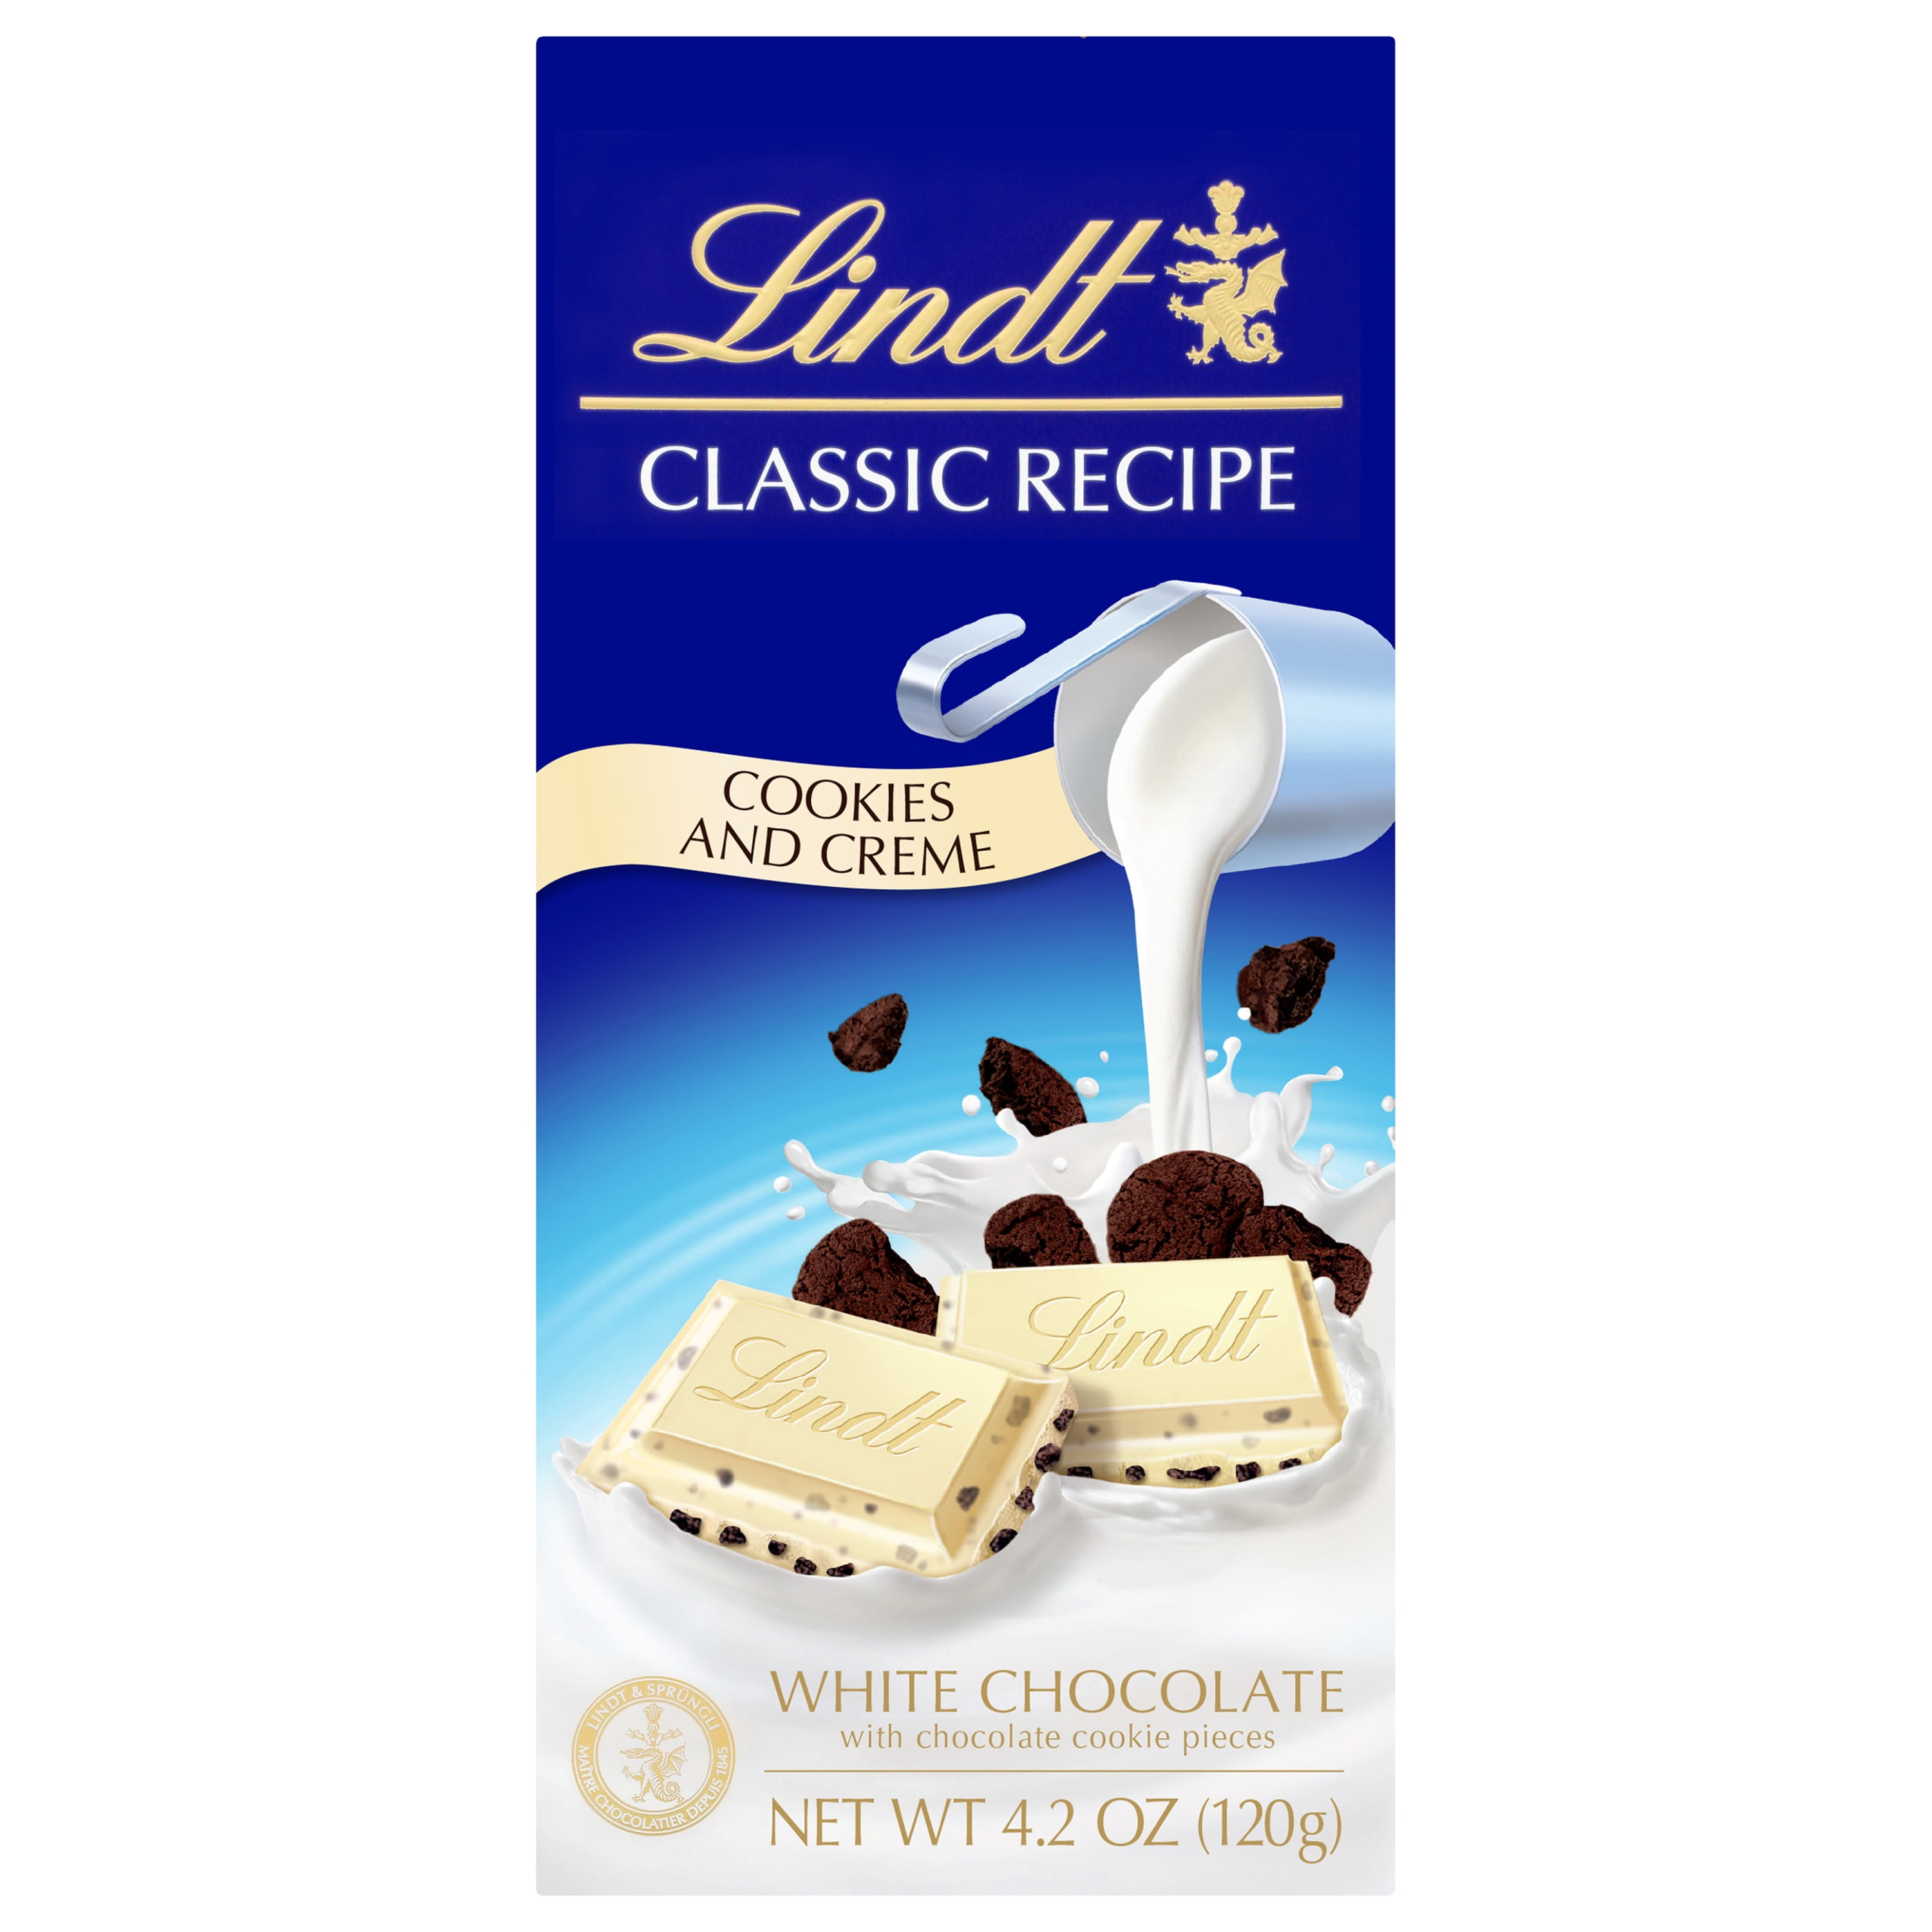 Lindt CLASSIC RECIPE Cookies and Creme White Chocolate Bar, Chocolate Easter Candy for Easter Baskets, 4.2 oz.